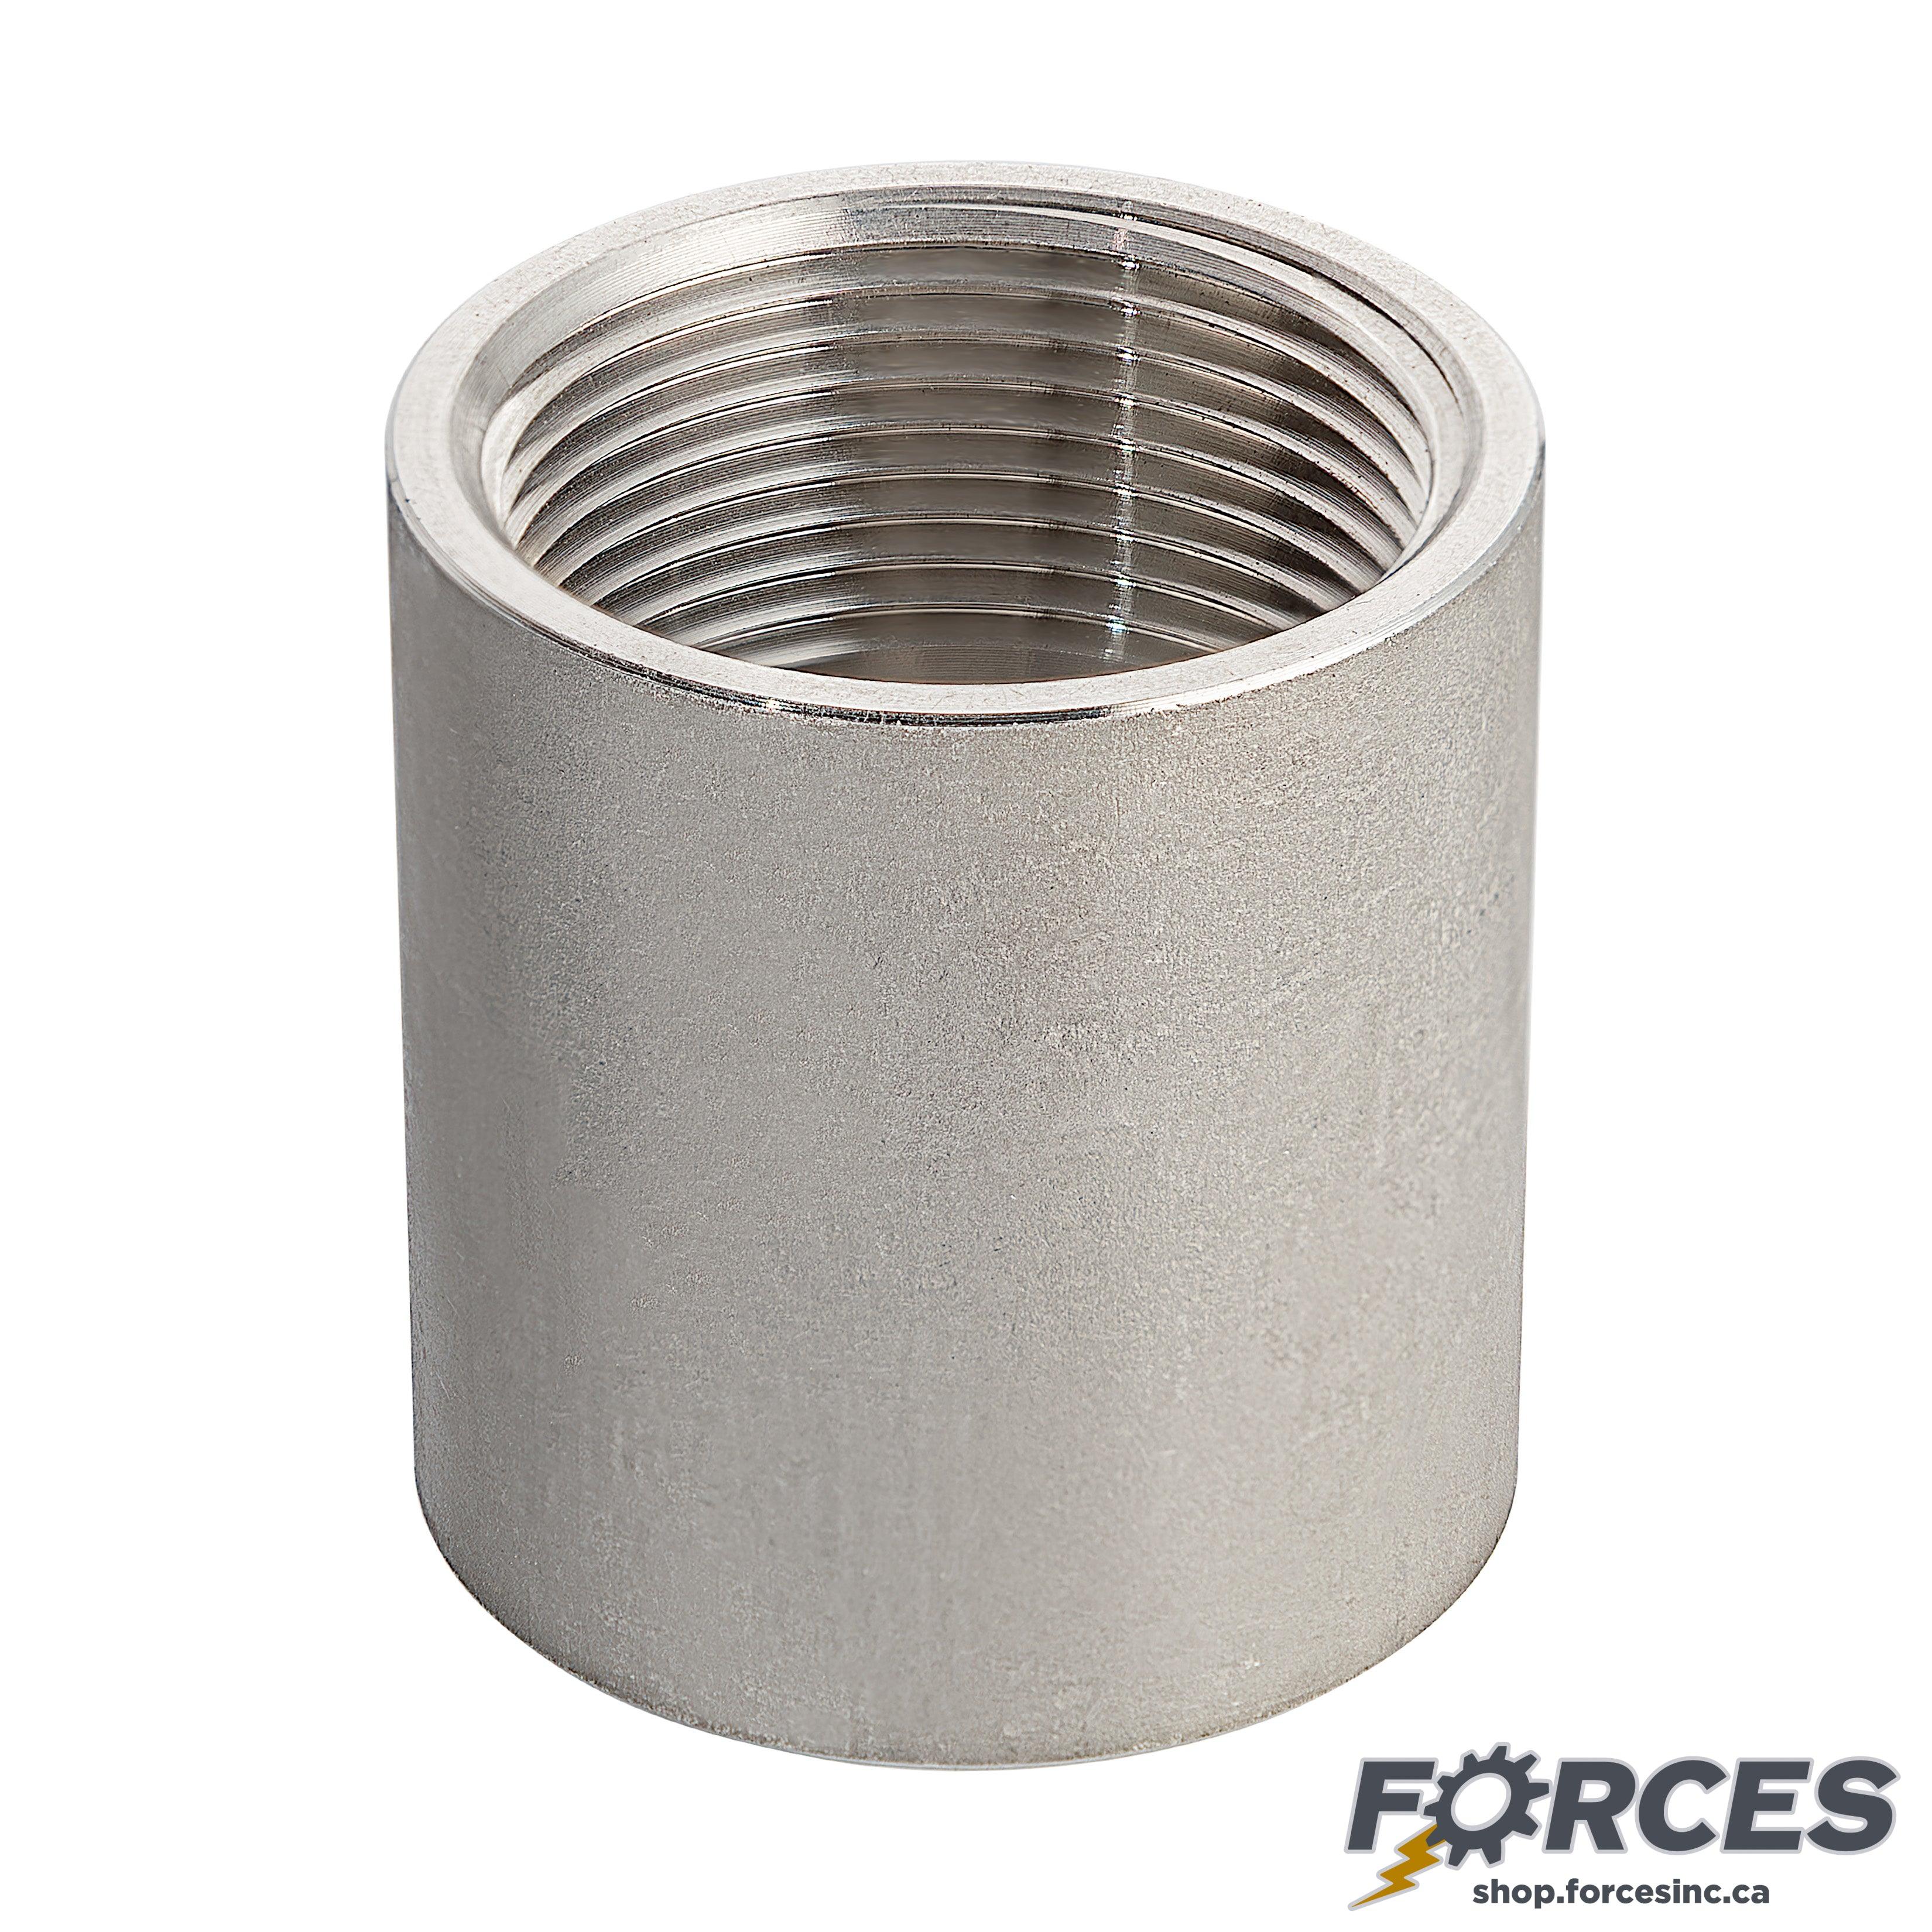 1/4" Coupling NPT #150 - Stainless Steel 316 - Forces Inc